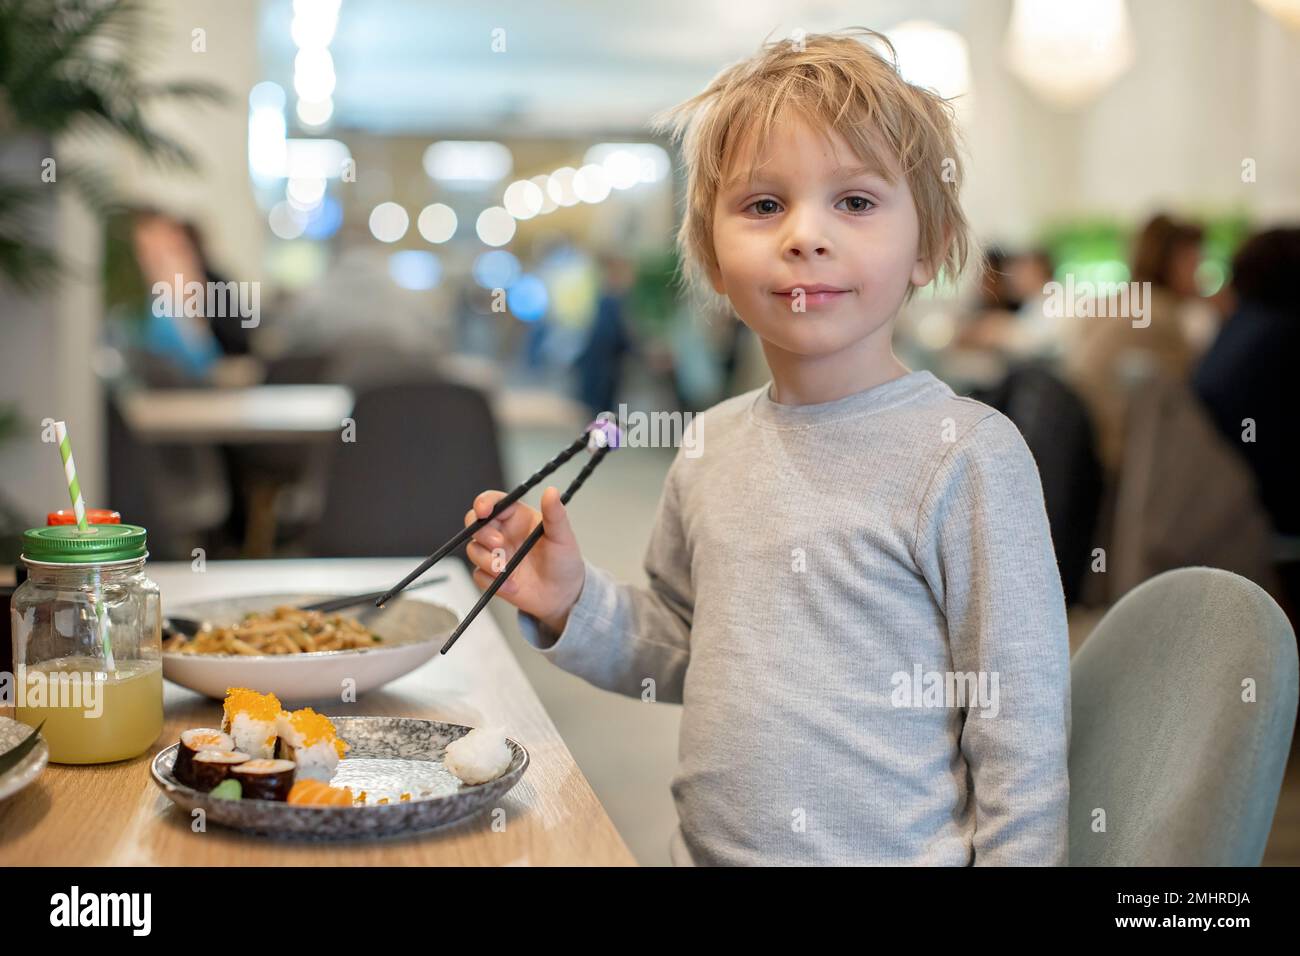 Child, eating japanese sushi and noodles with chopsticks in a restaurant, dinnertime Stock Photo